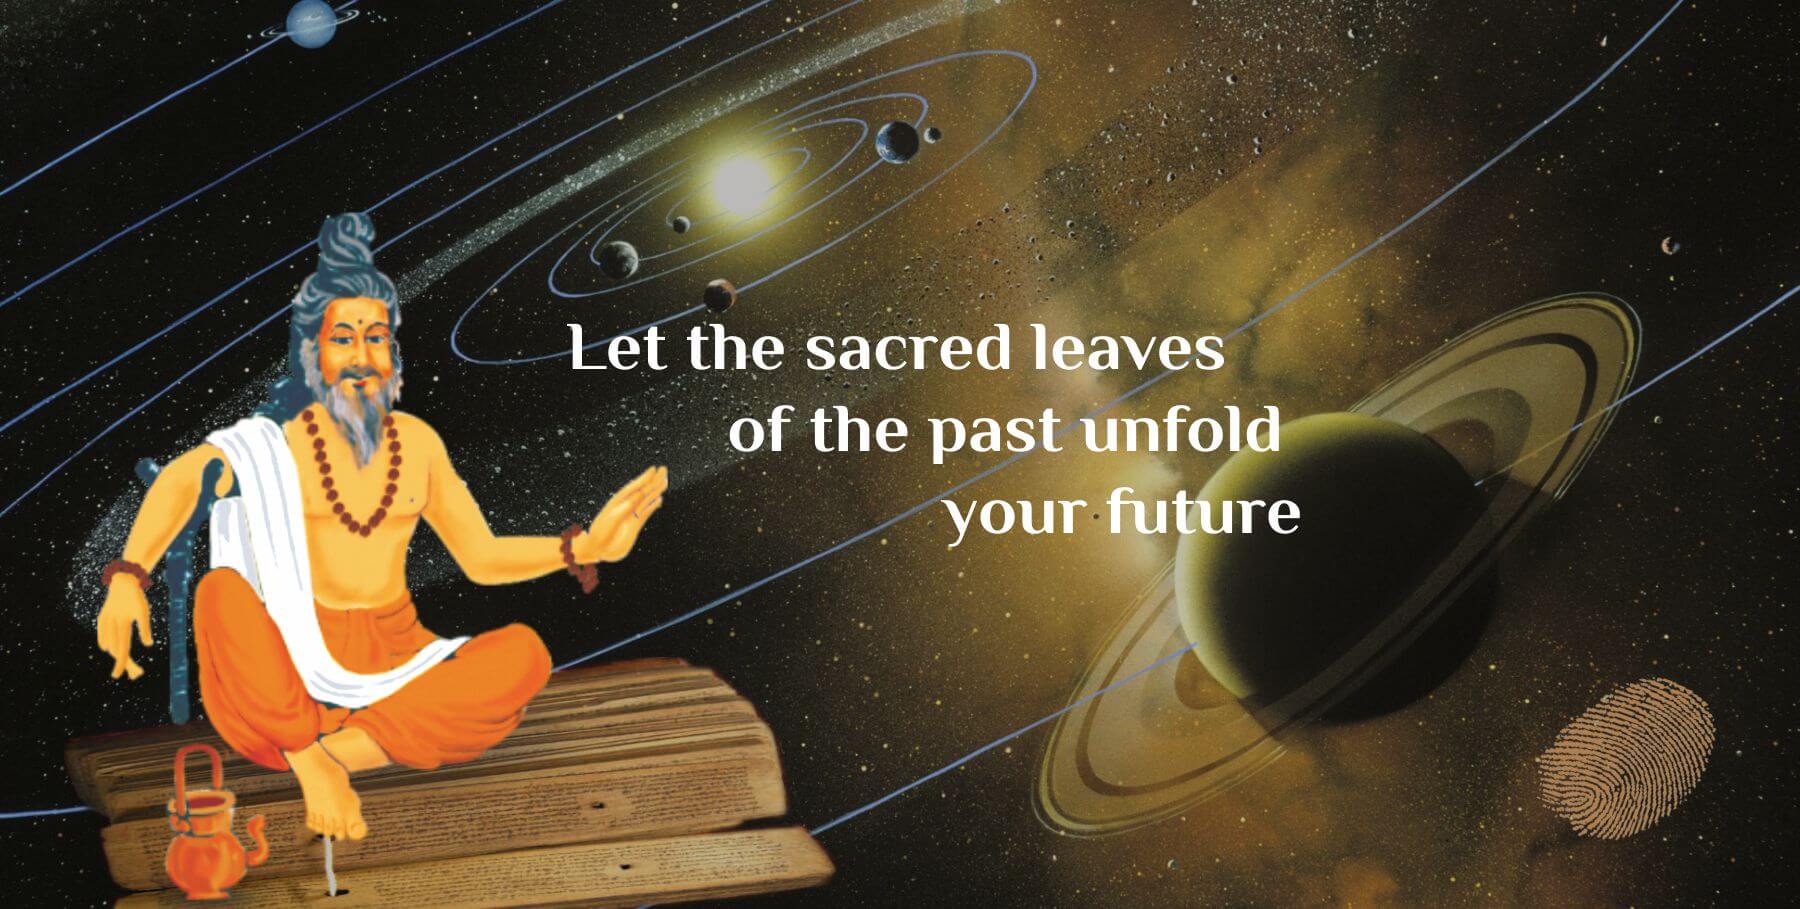 Let the sacred leaves of the past unfold your future